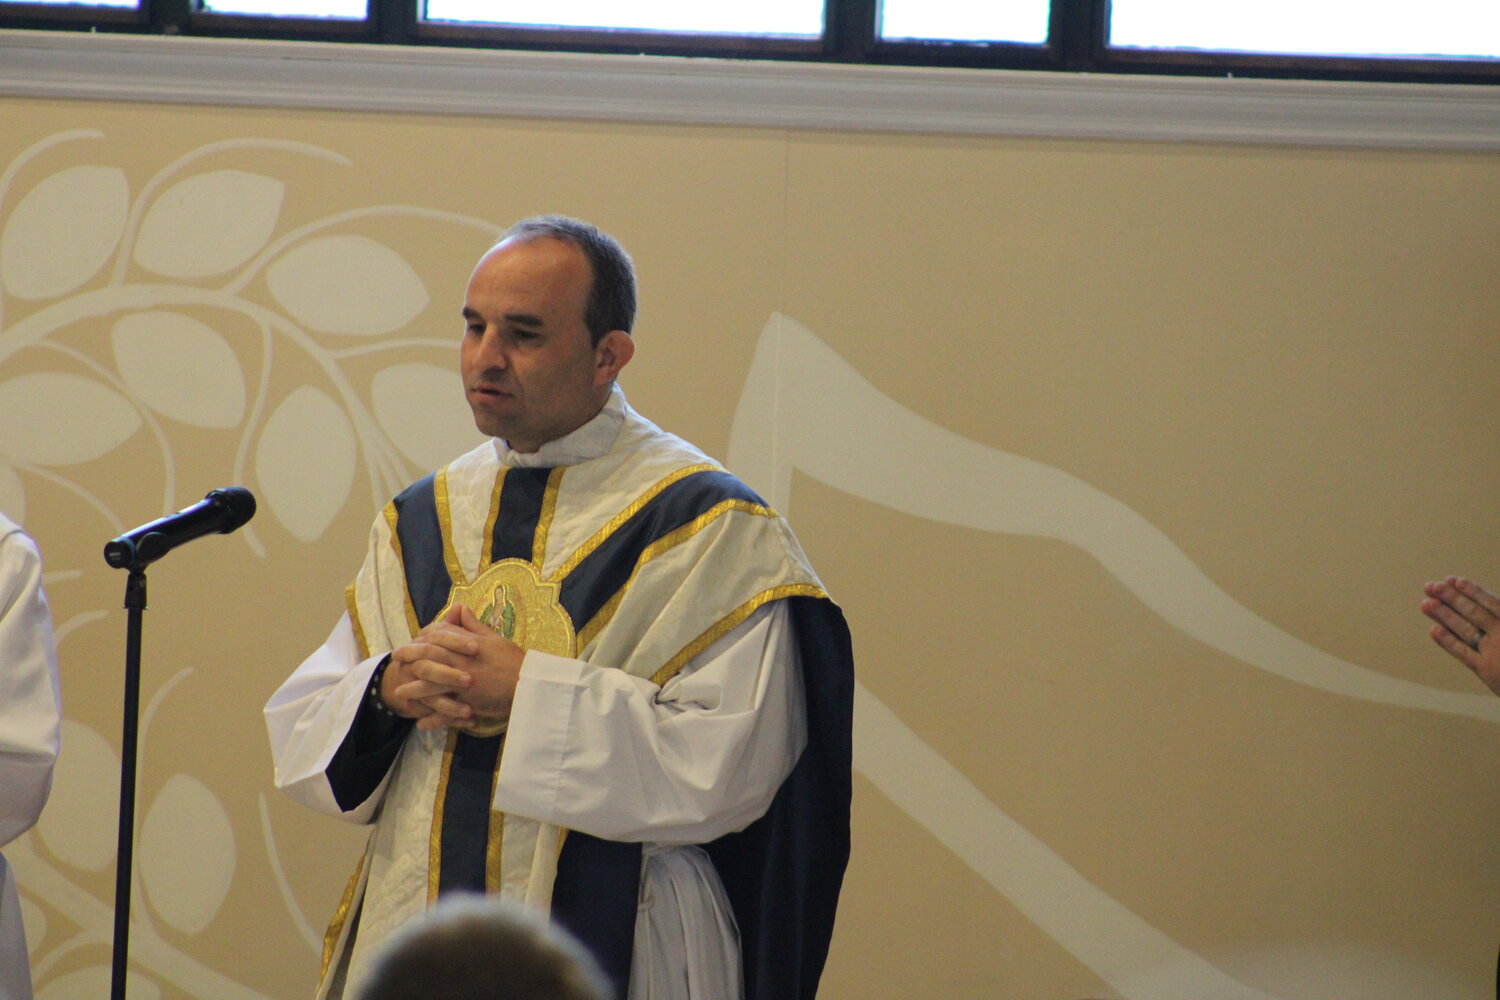 Father Eddie celebrates Mass during the 8 a.m. service at Holy Rosary on Aug. 22.